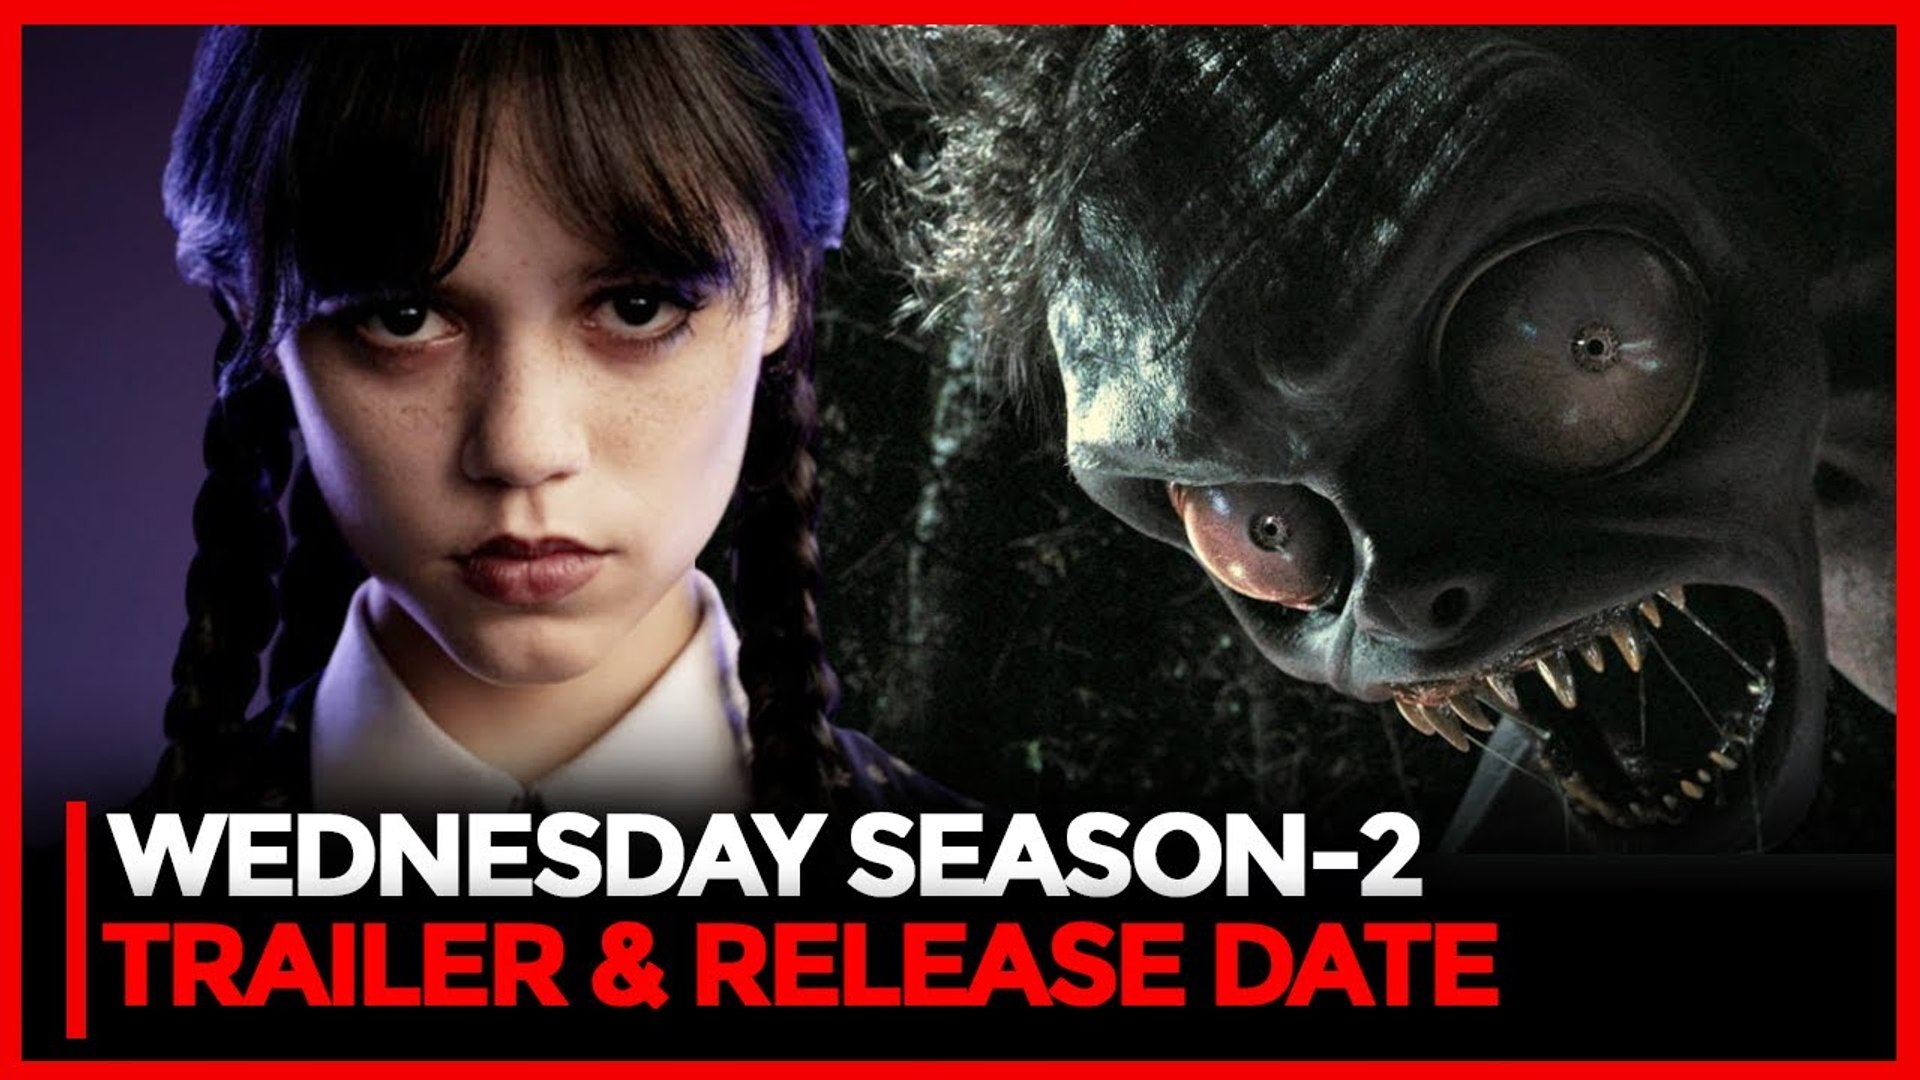 When Will Wednesday Season 2 Be Released?